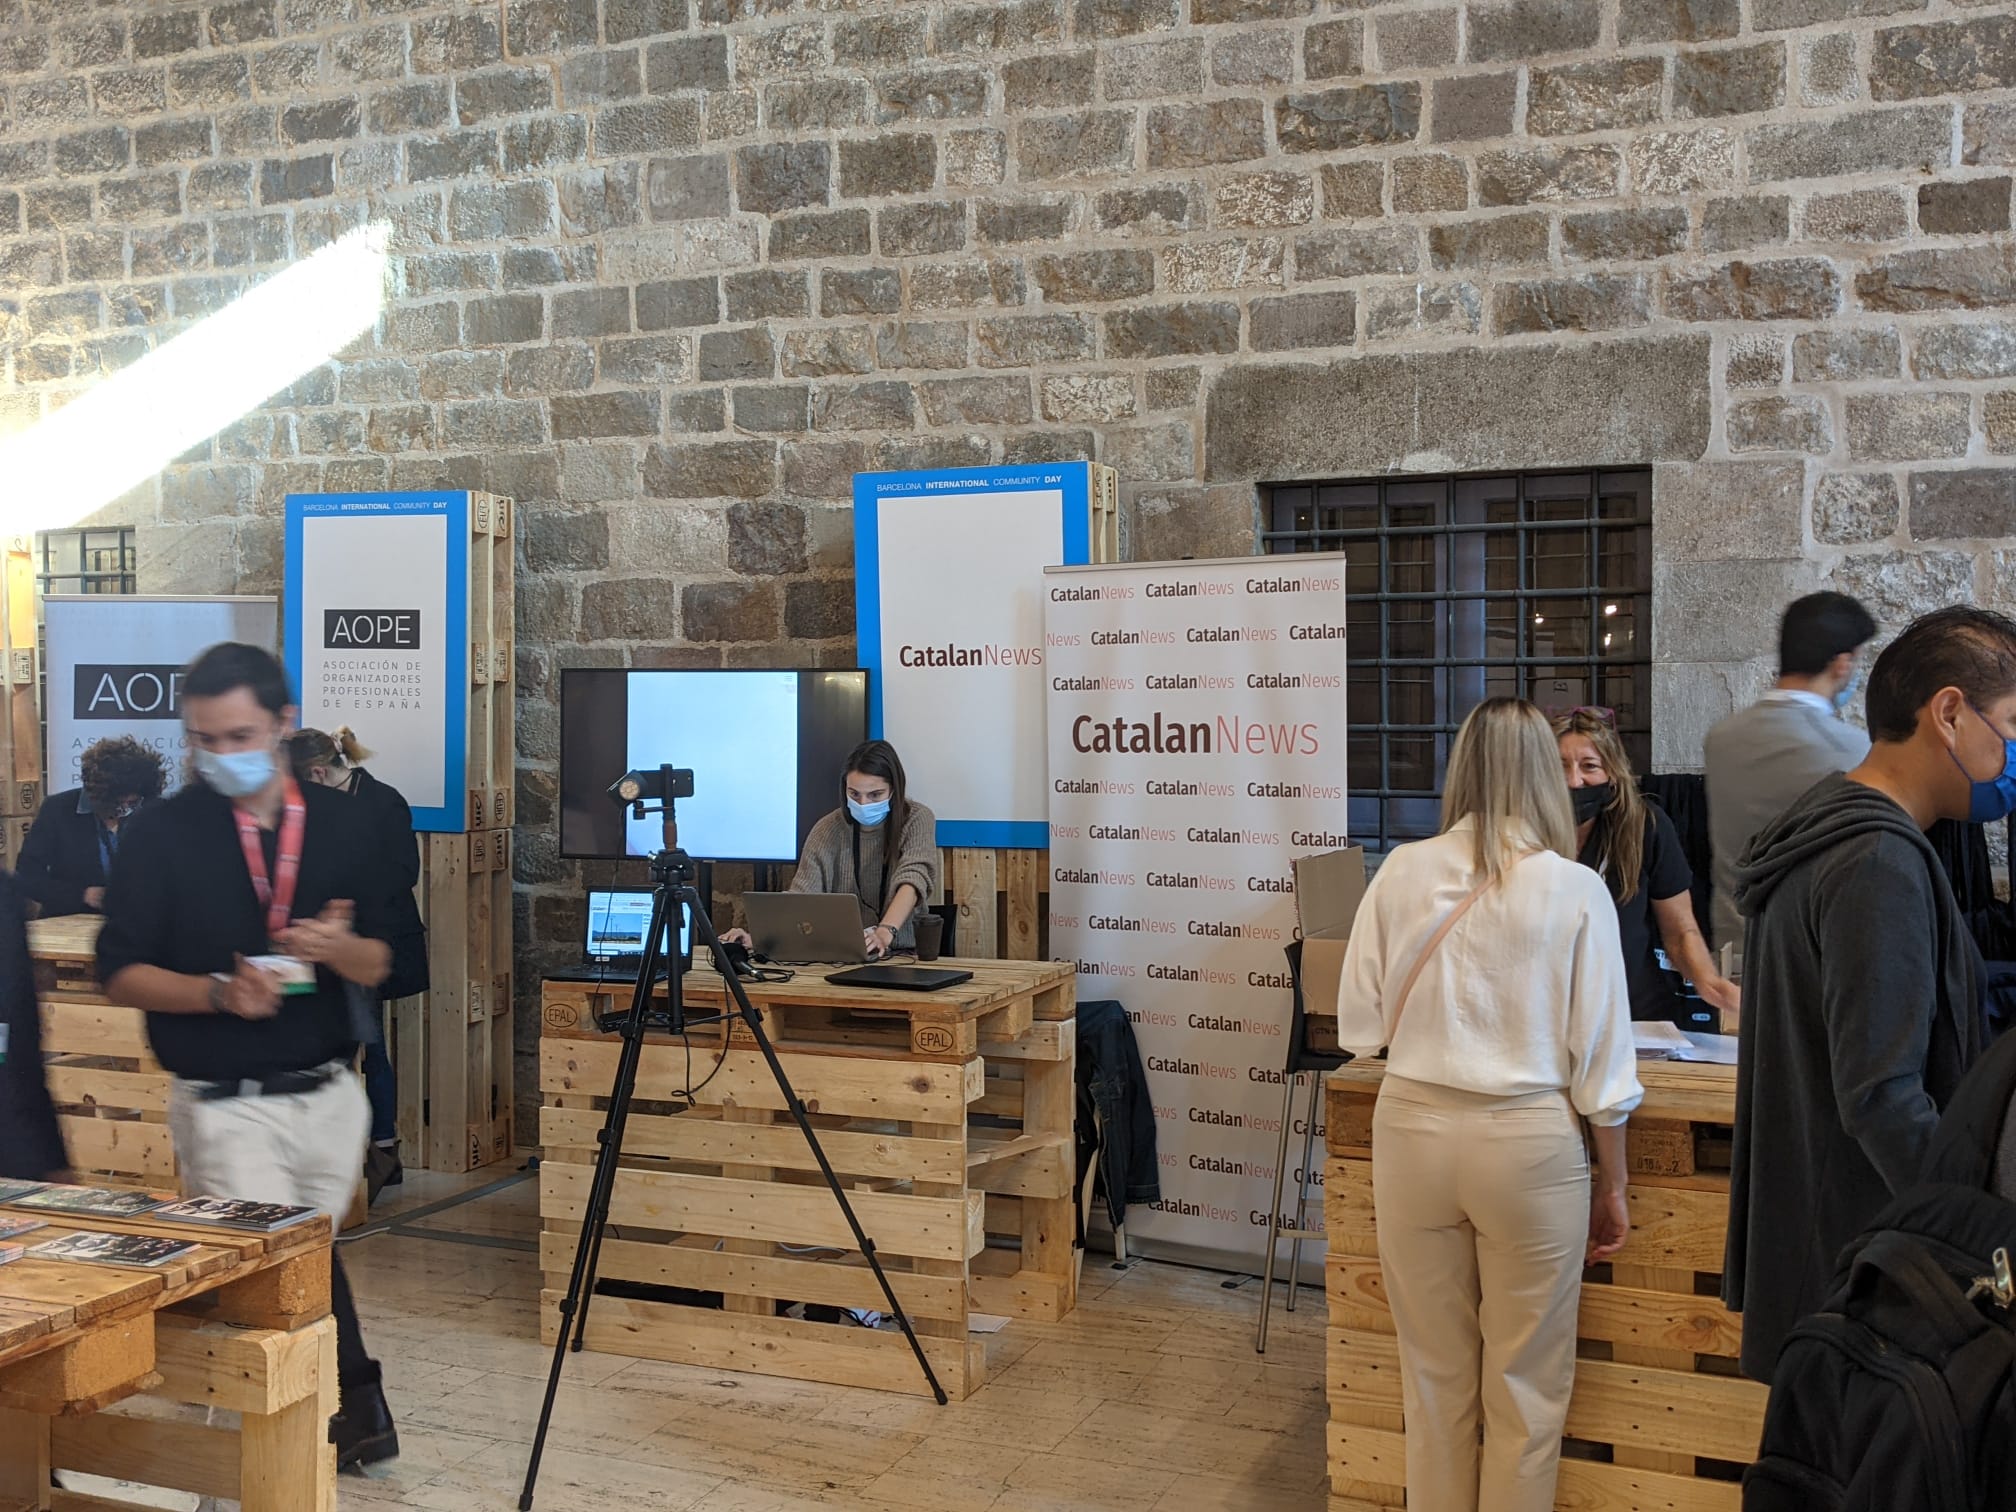 The Catalan News stall at the Barcelona International Community Day (by Cillian Shields)